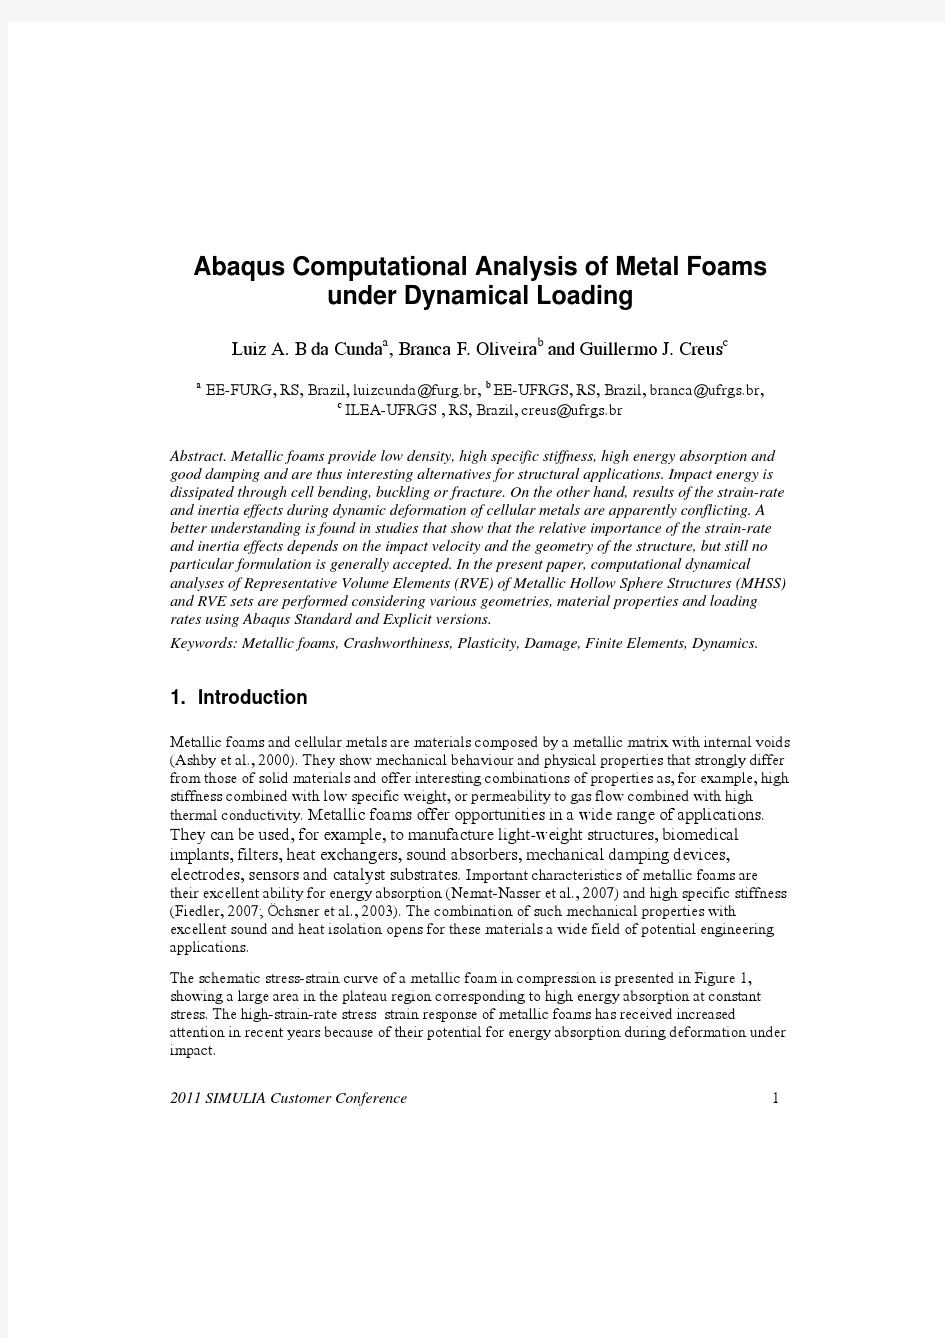 Abaqus Computational Analysis of Metal Foams under Dynamical Loading